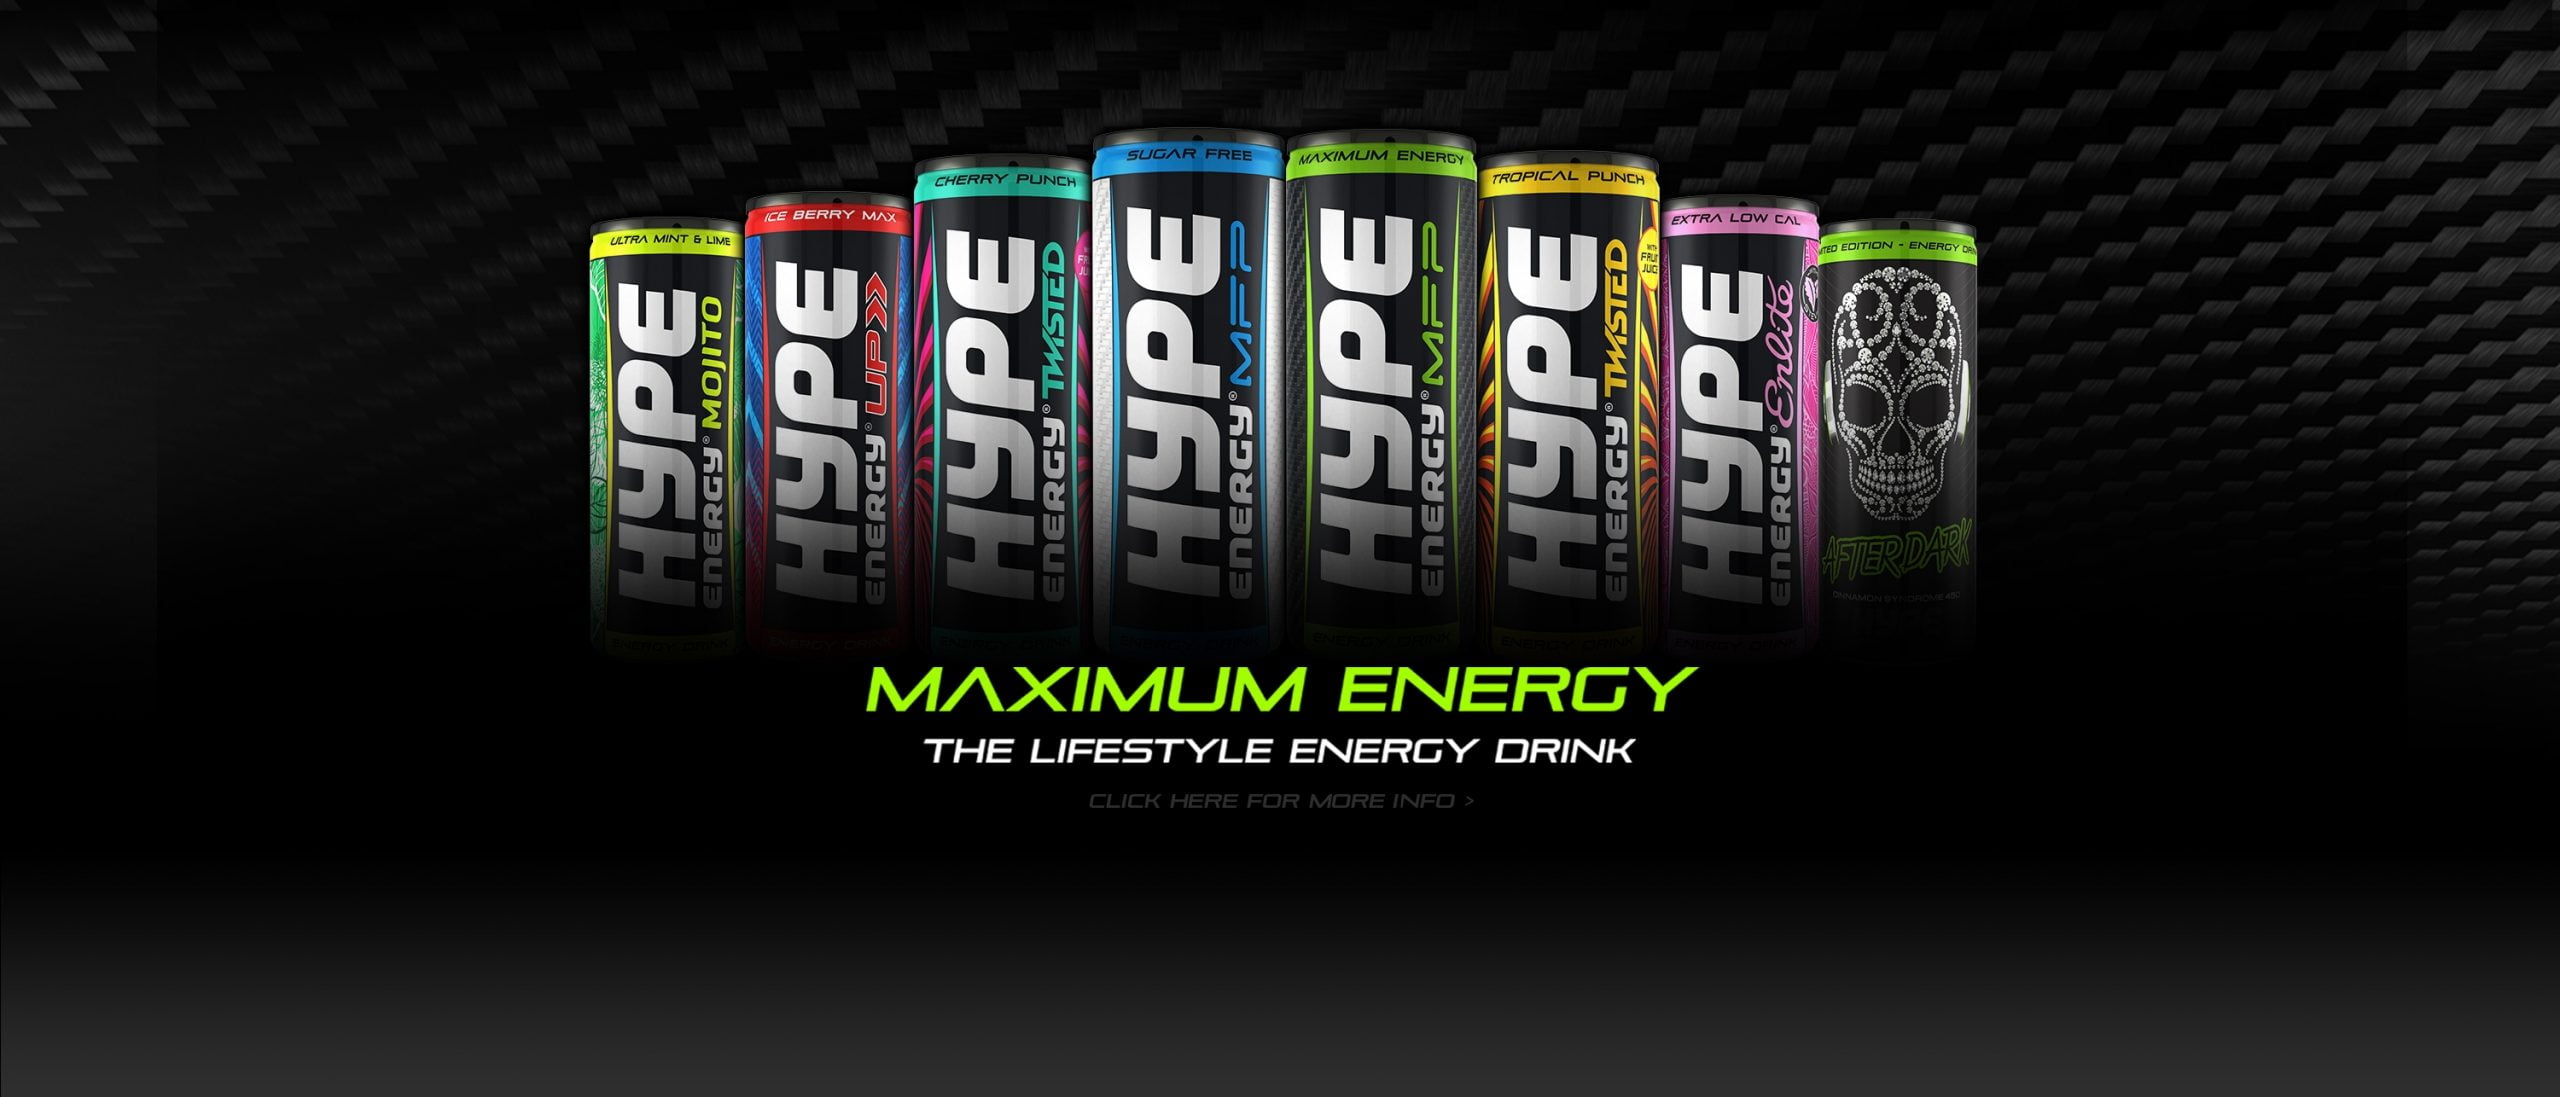 A wide range of Hype energy drinks.